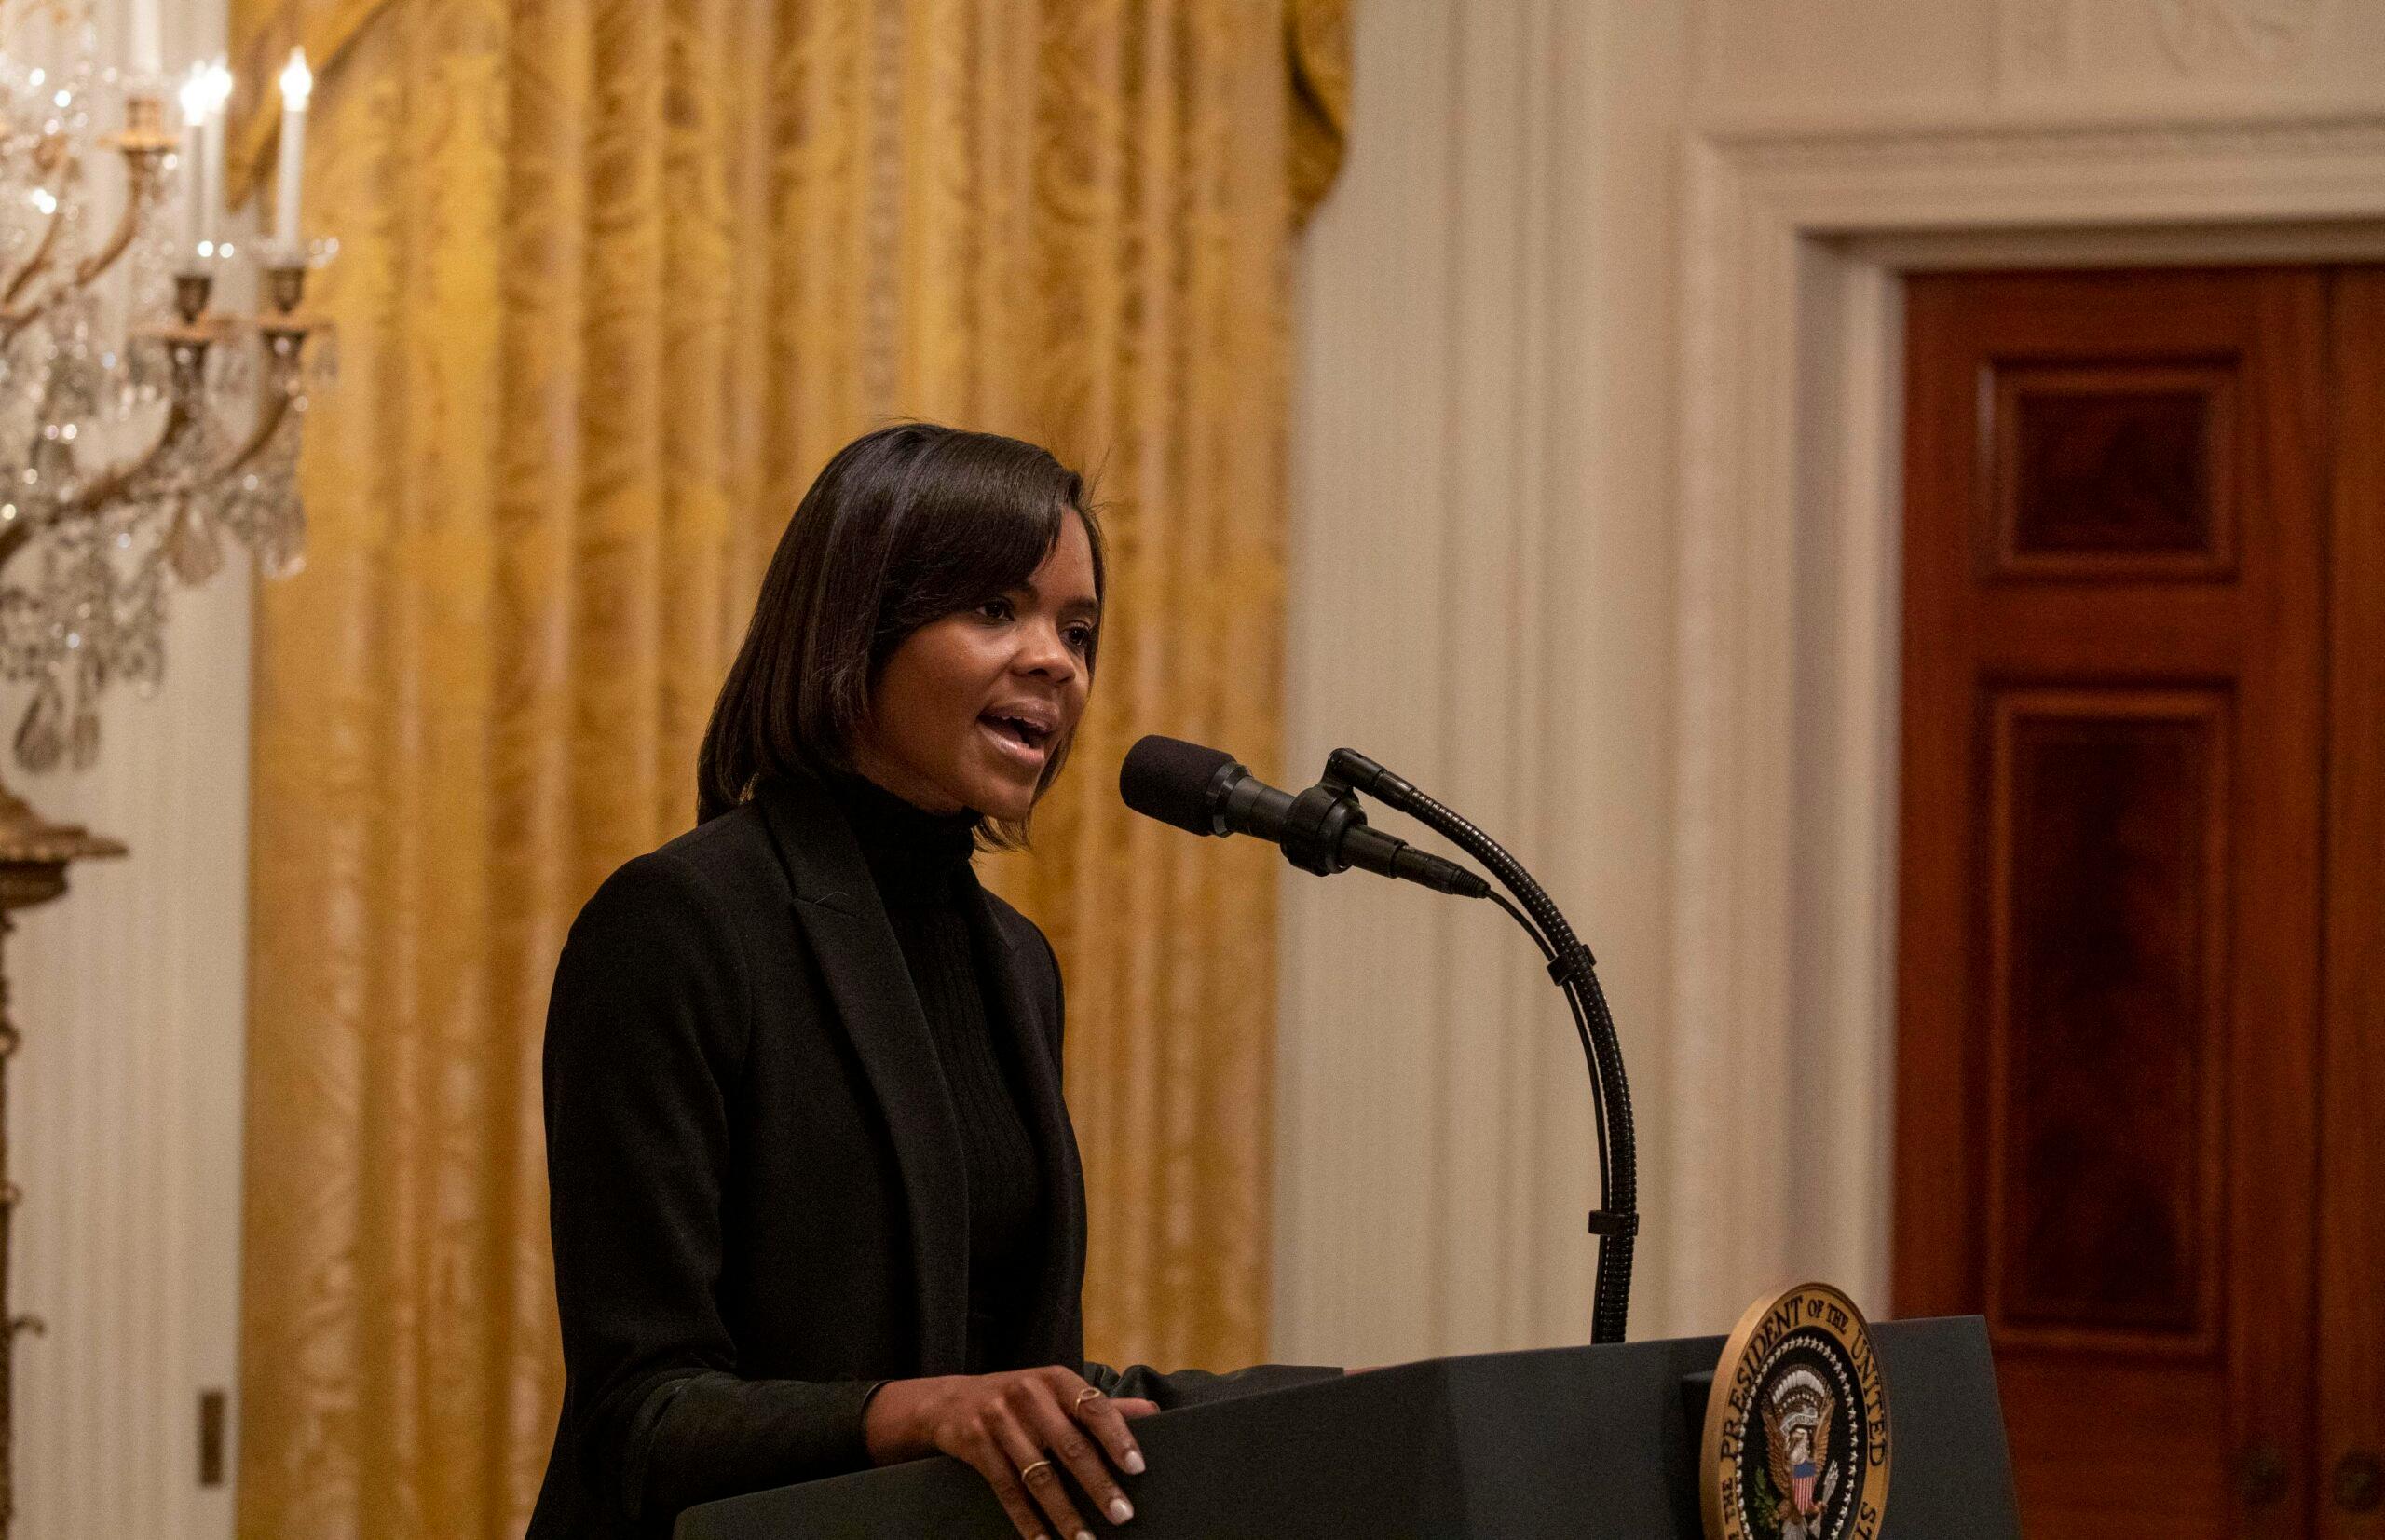 Candace Owens speaks at the Young Black Leadership Summit 2019 at the White House in Washington, D.C